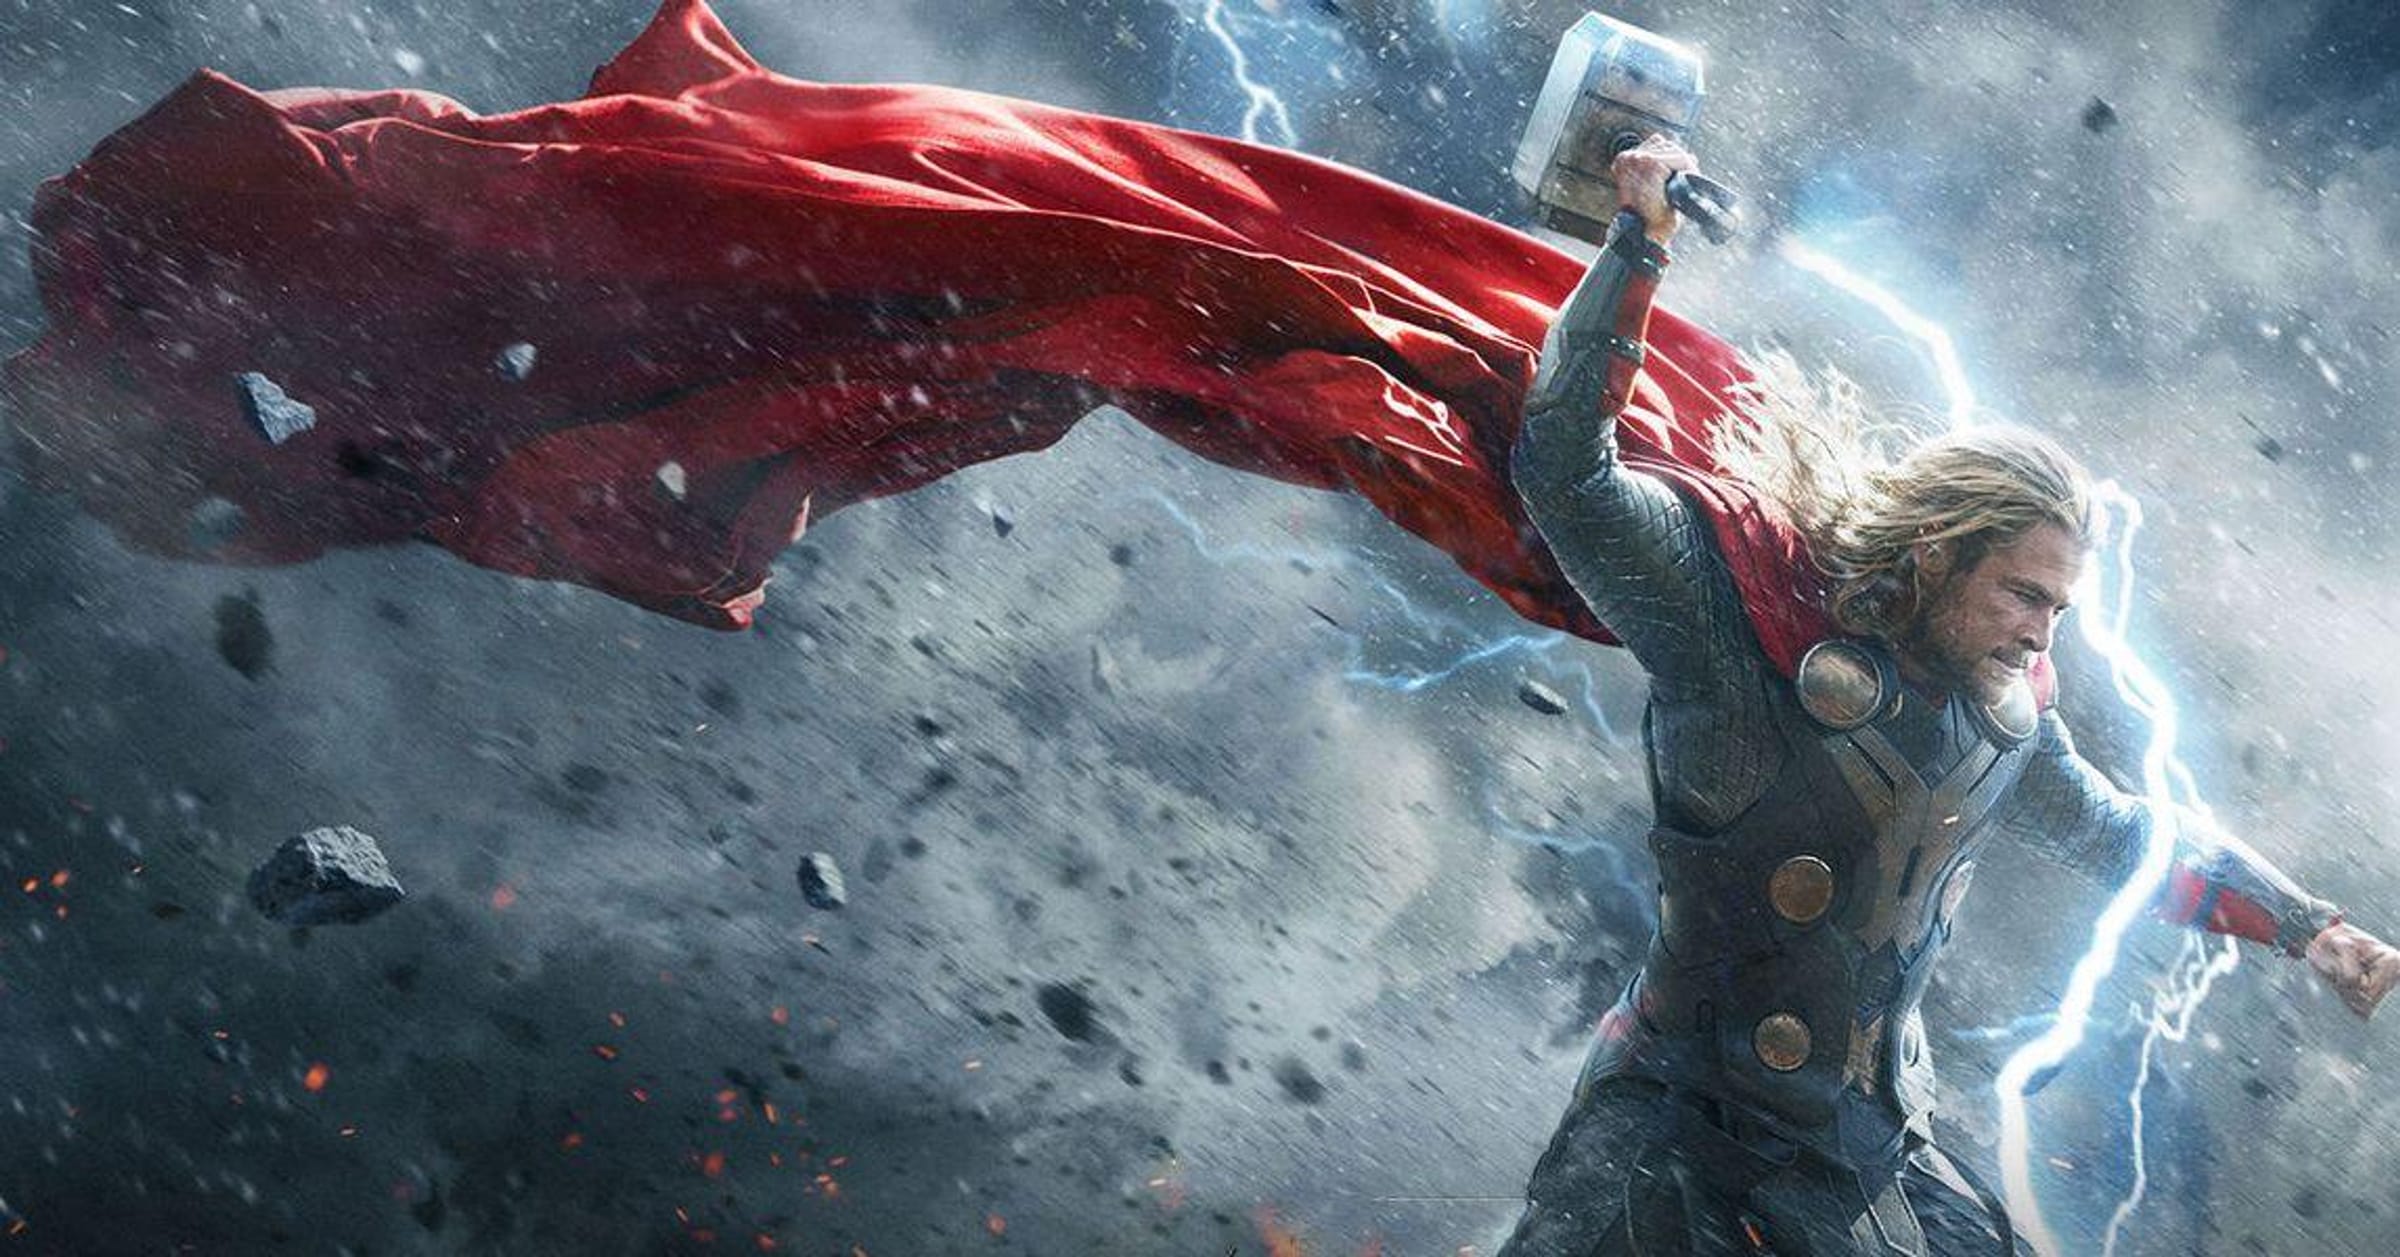 Thor – Ragnarok: The Perfect Blend of Fantasy and Sci-Fi Action, Events